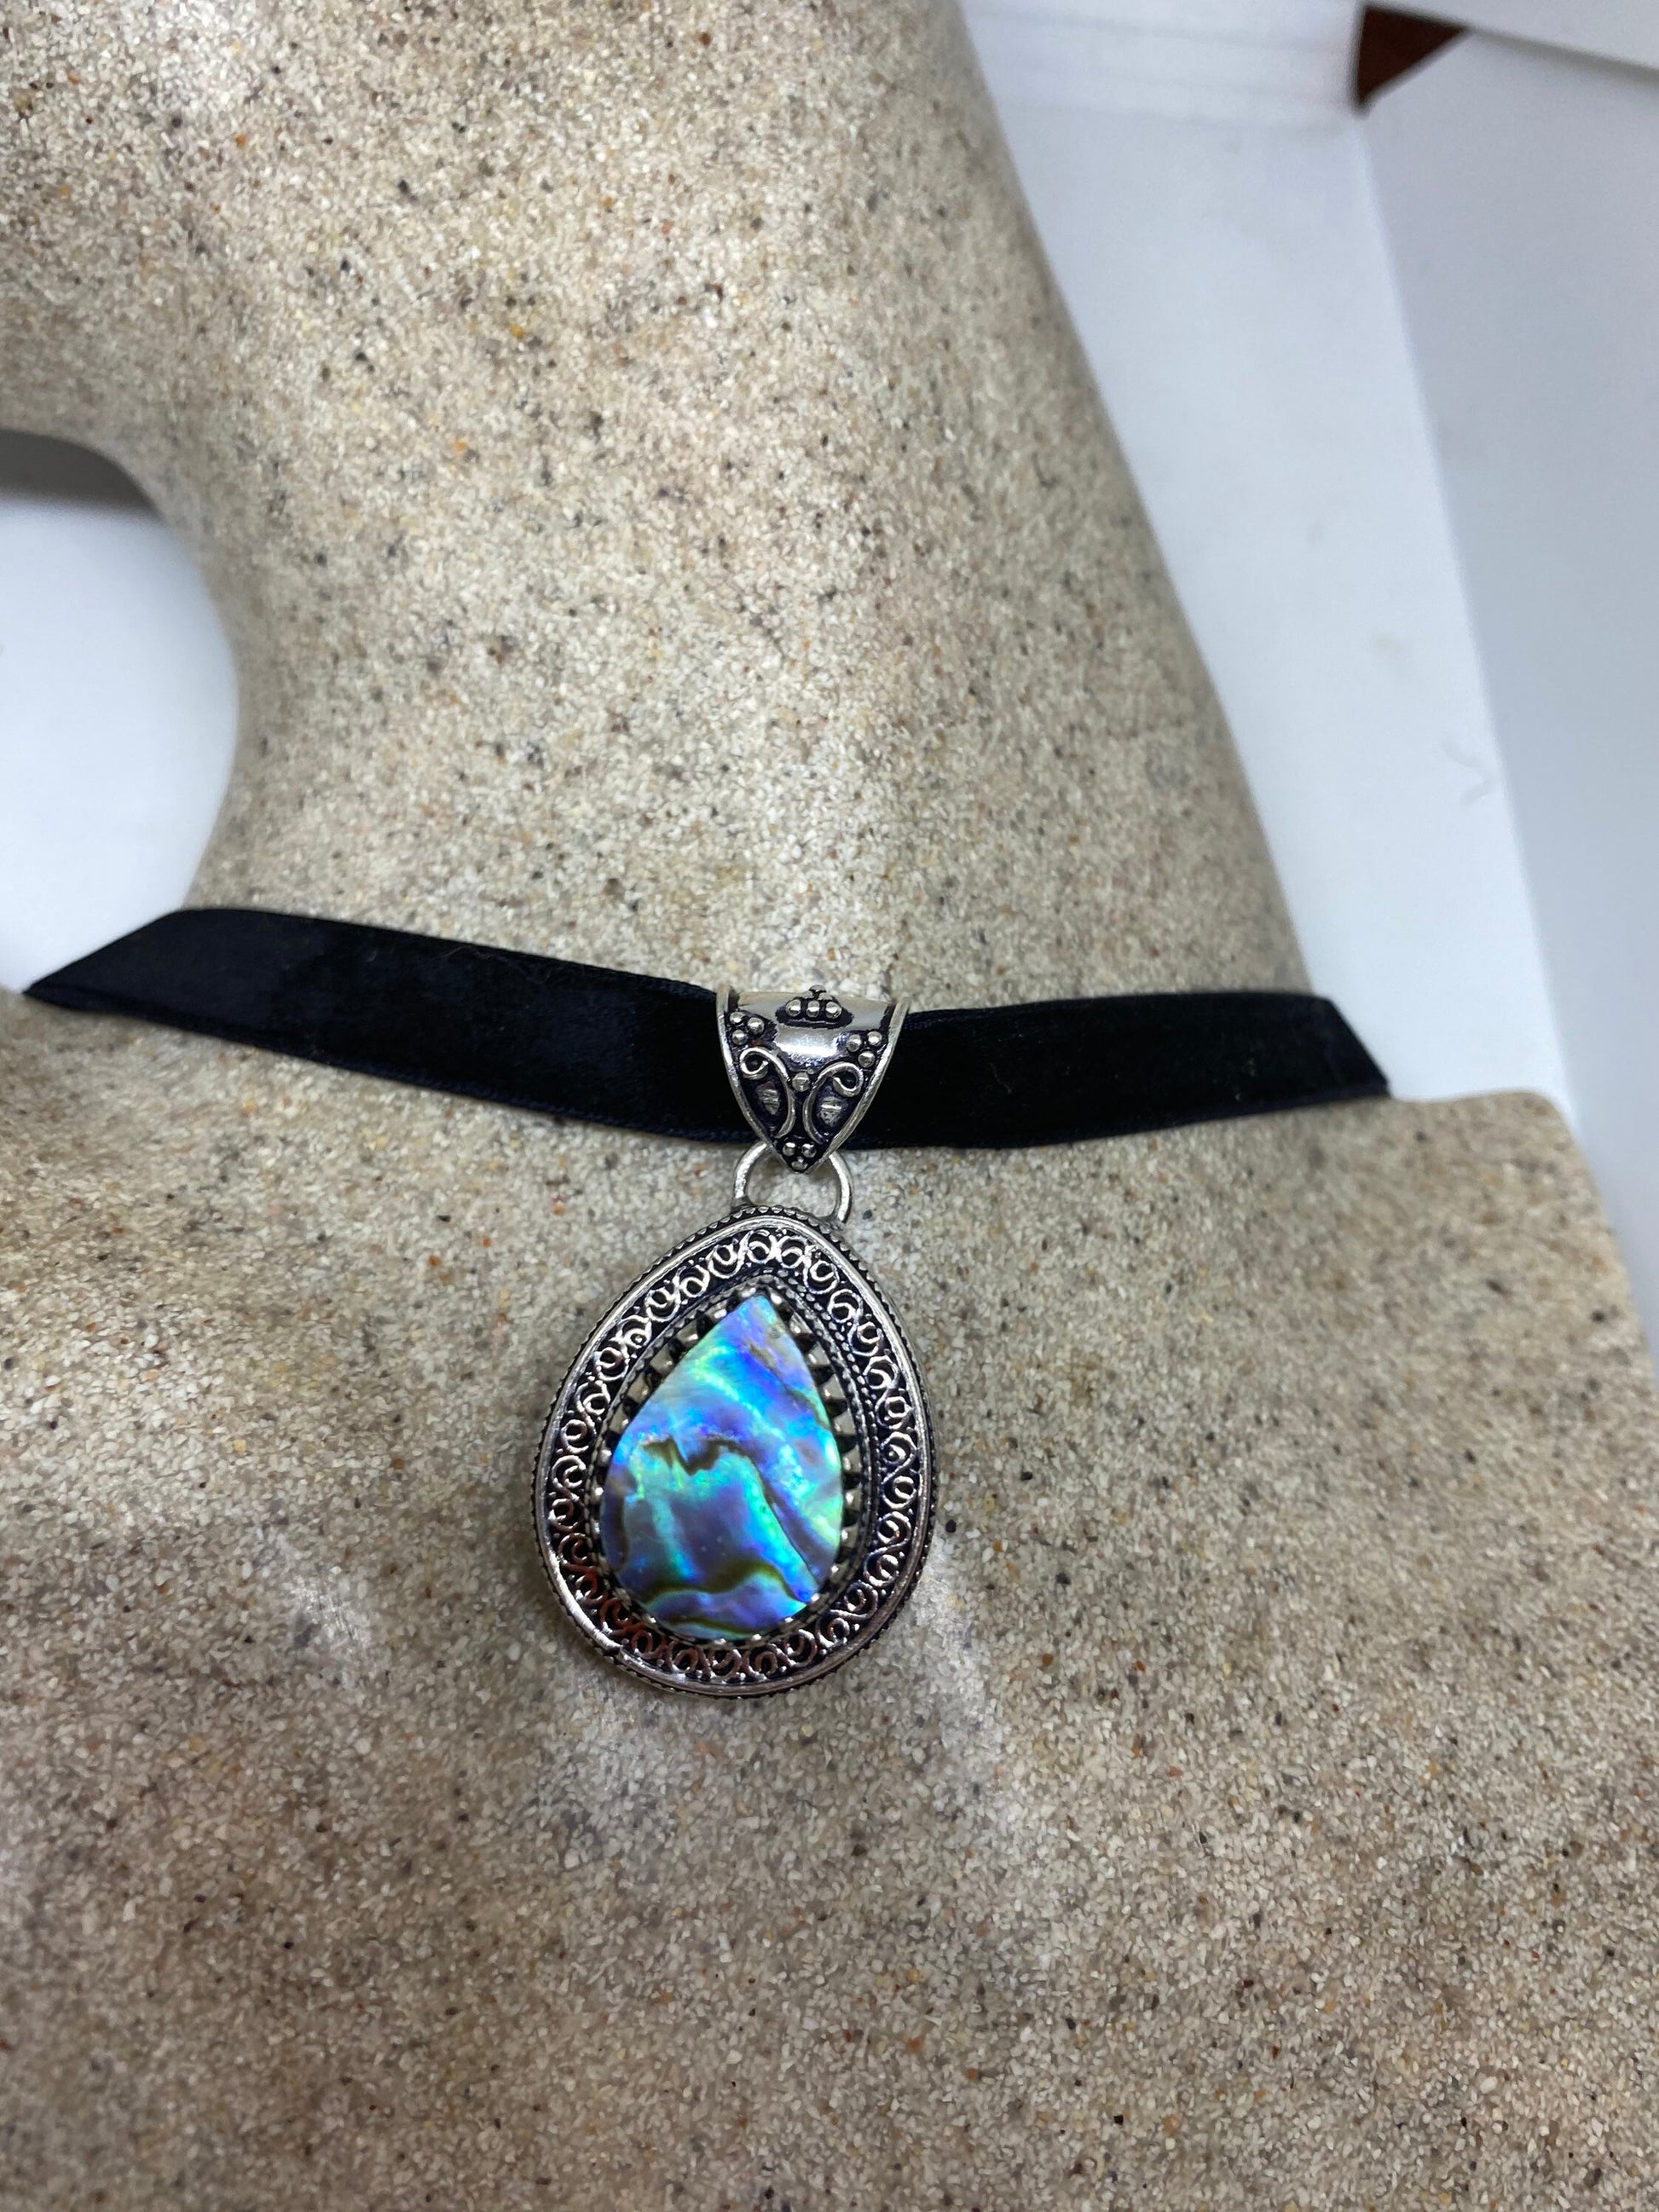 Vintage Silver Finished Genuine Antique Abalone Choker Necklace